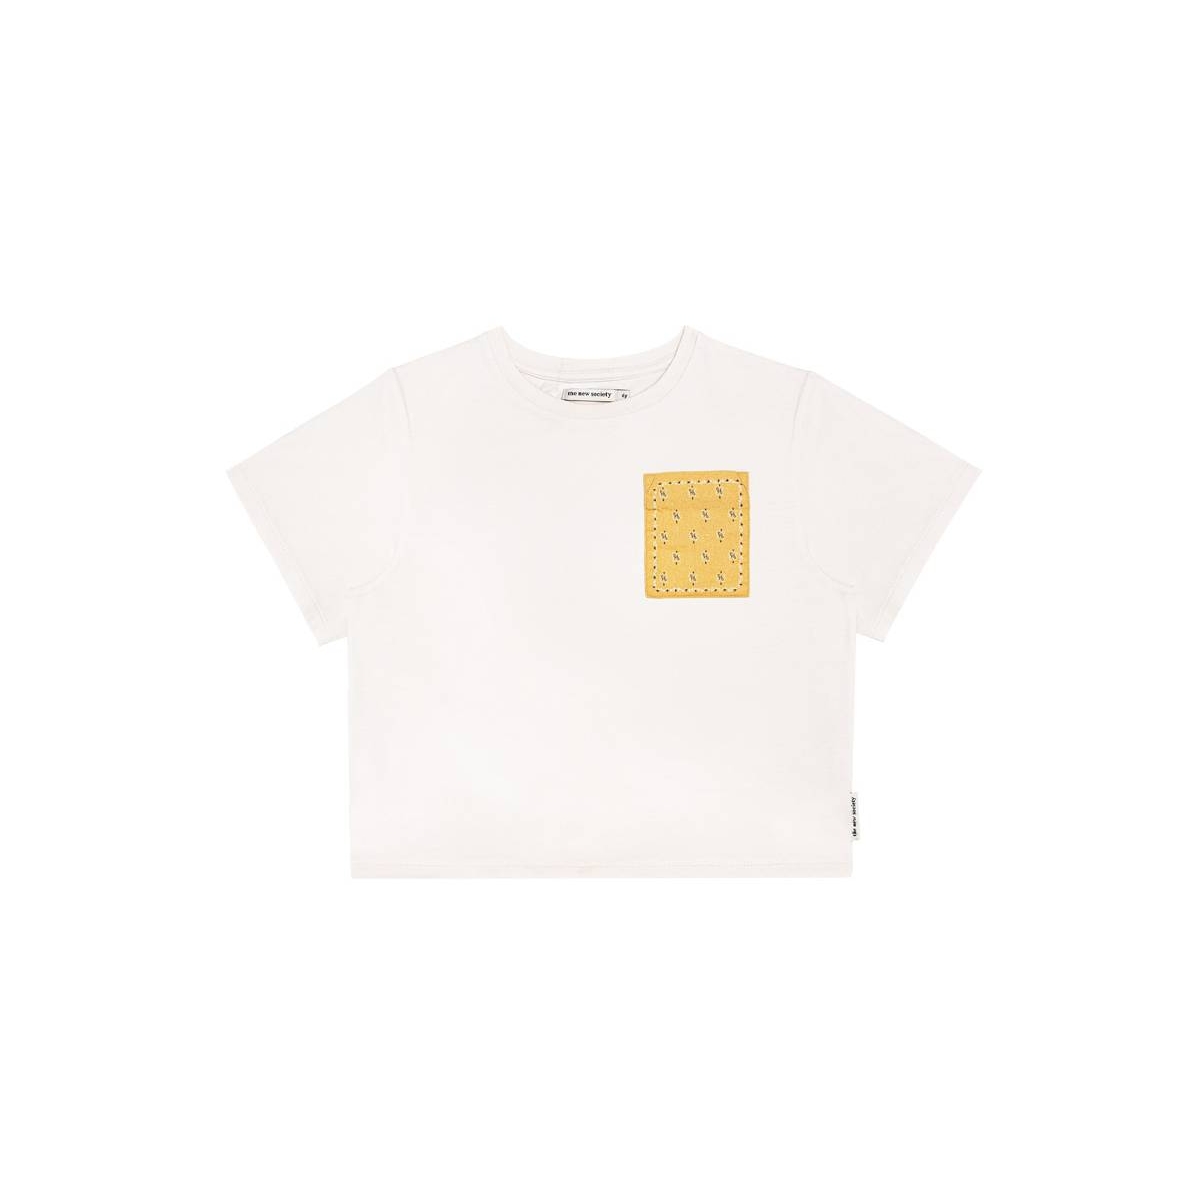 The New Society Positional tee white S22-K/J17-OTTO-TEE.01 